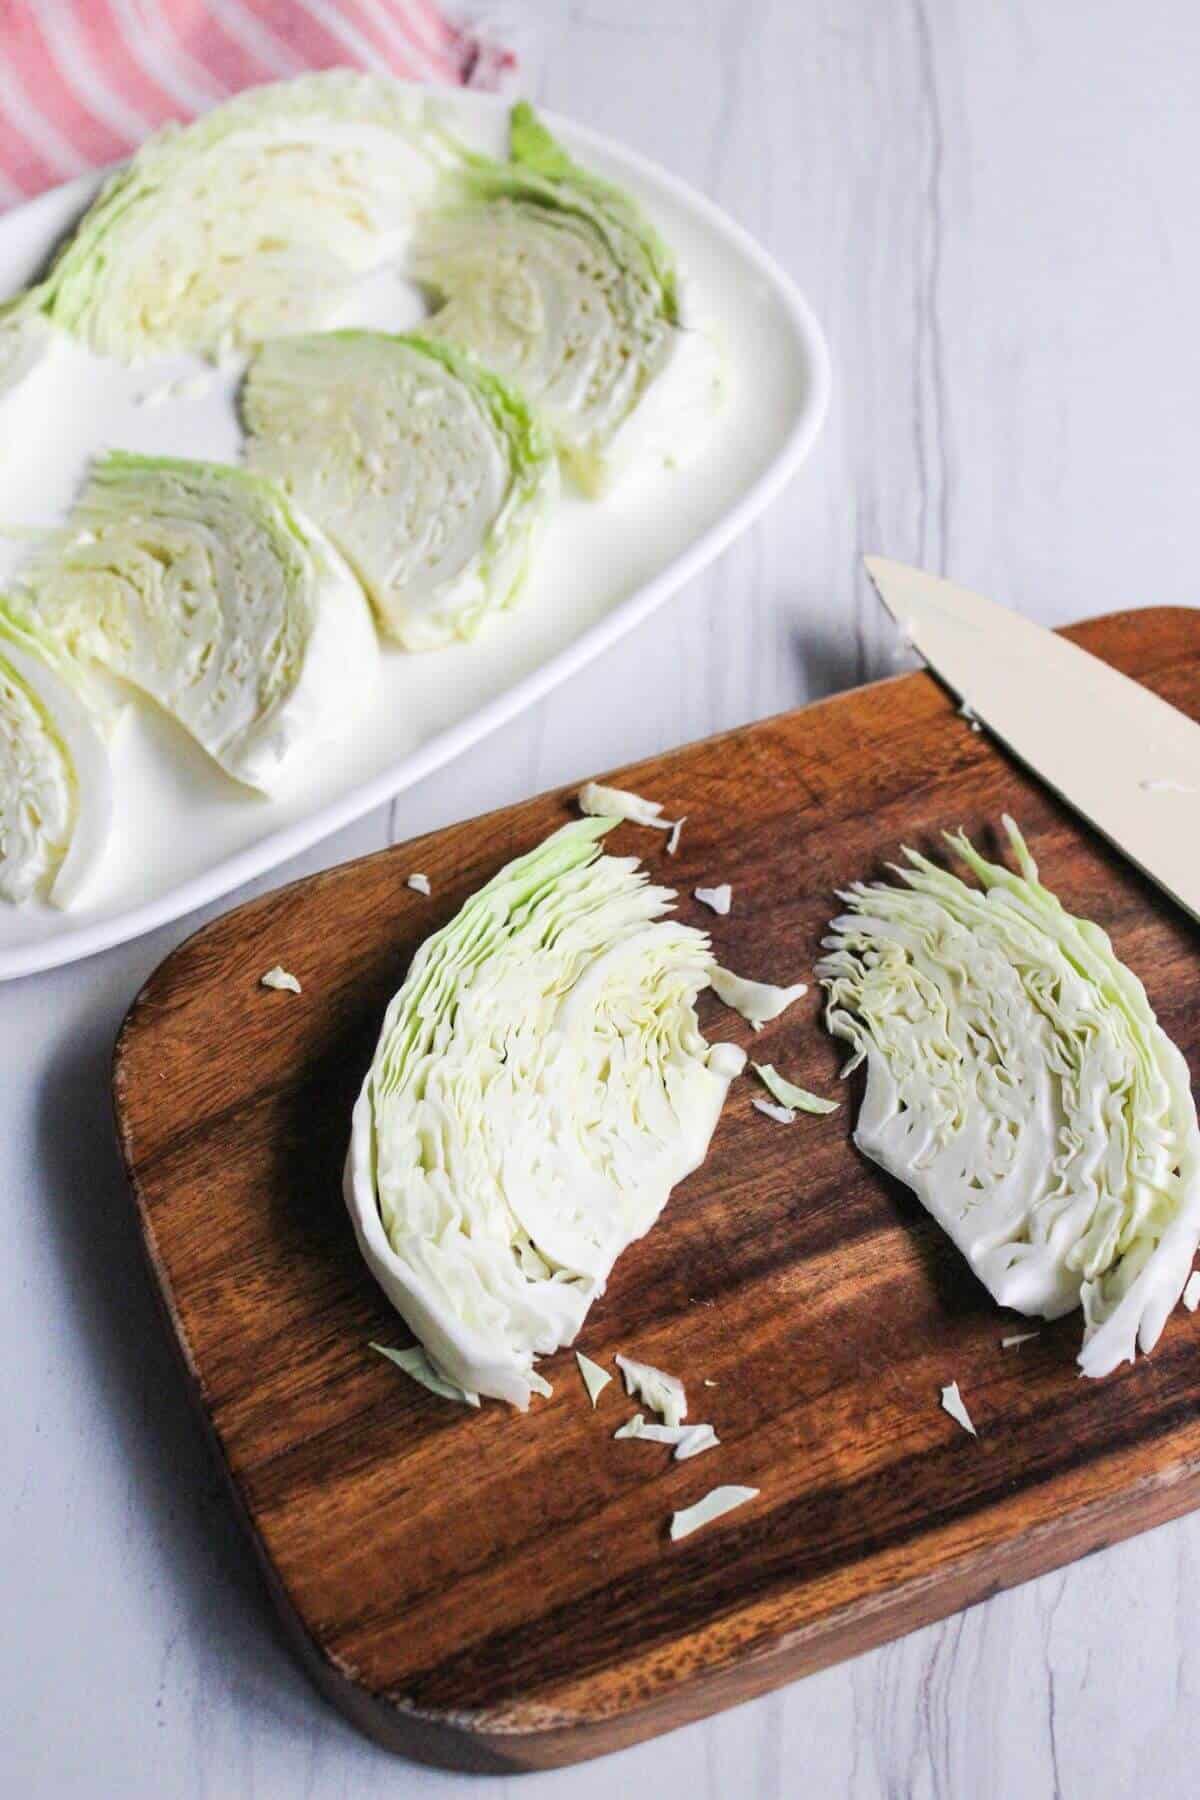 Cabbage sliced into wedges.